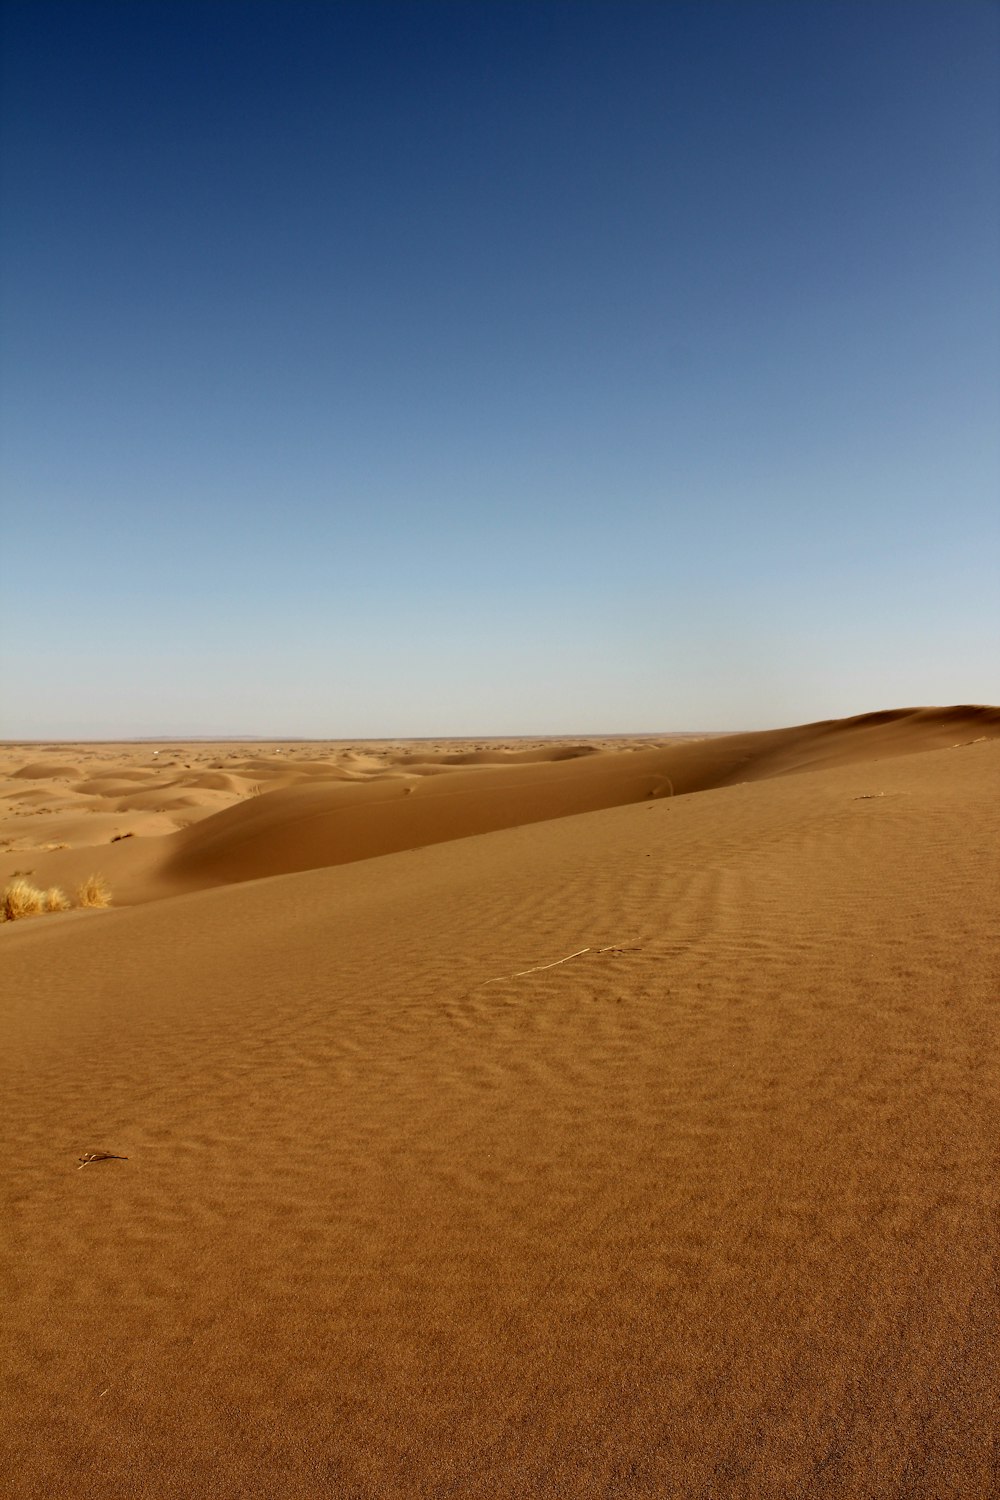 a desert landscape with sand dunes and a blue sky